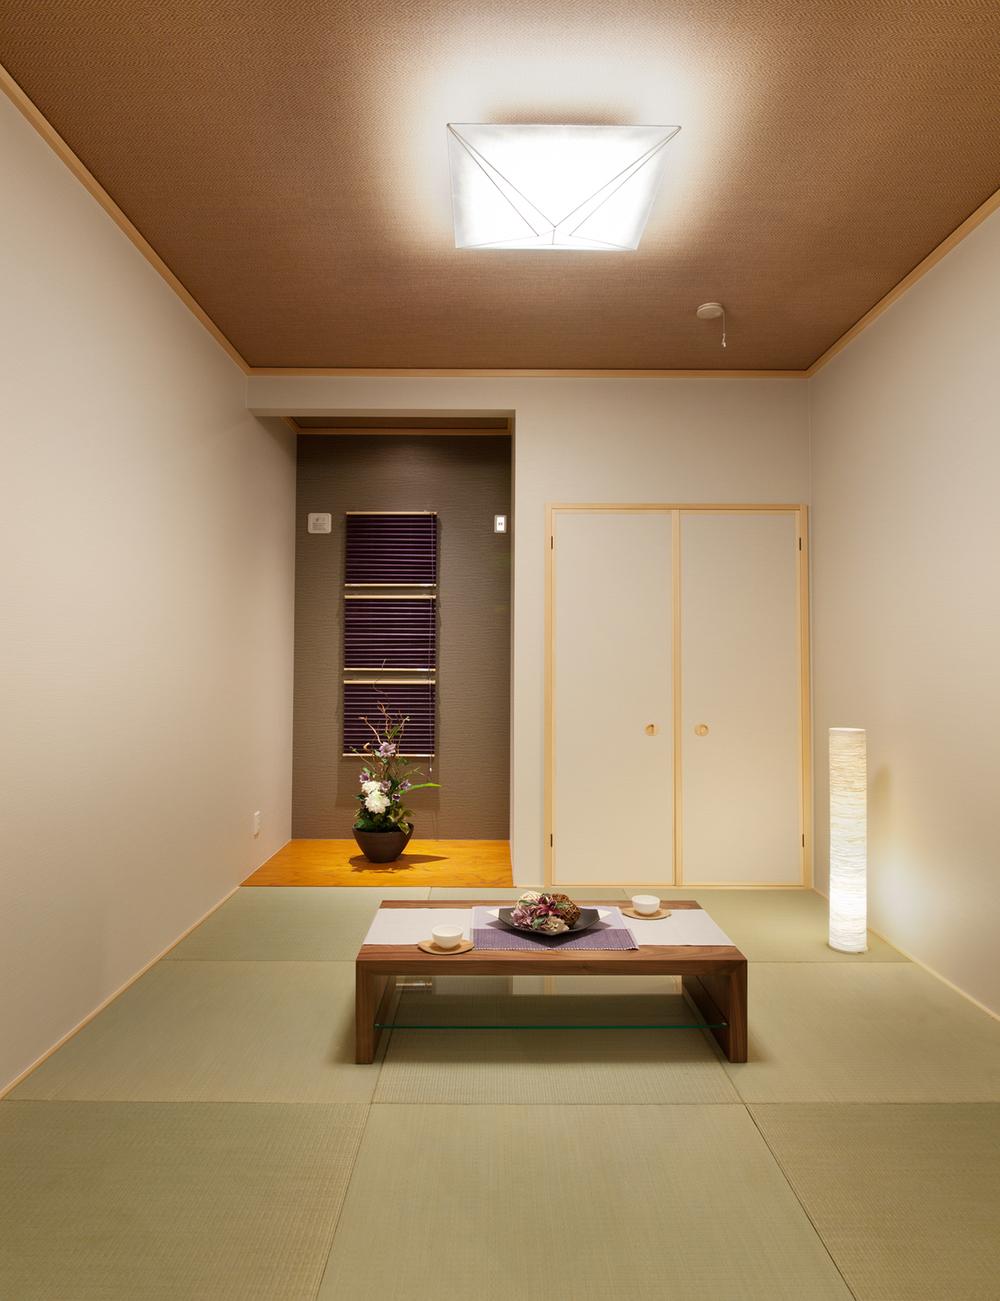 Model house photo. Easy-to-use Japanese-style room adjacent to the living room. If Shimere the door, Become a separate room, You can effectively use according to the purpose.